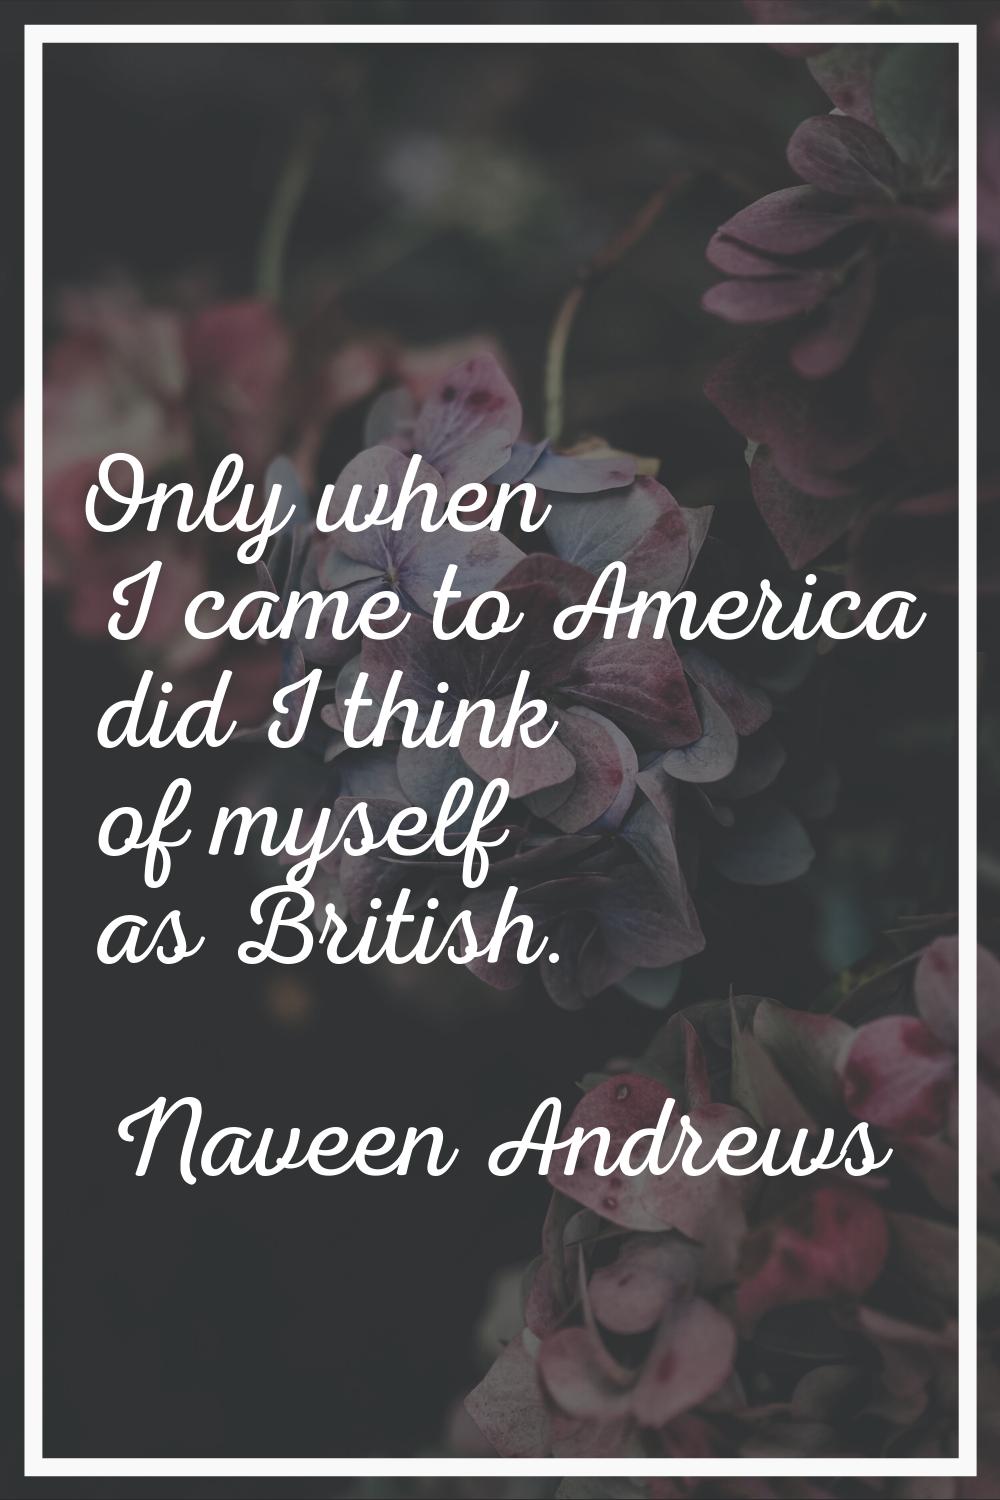 Only when I came to America did I think of myself as British.